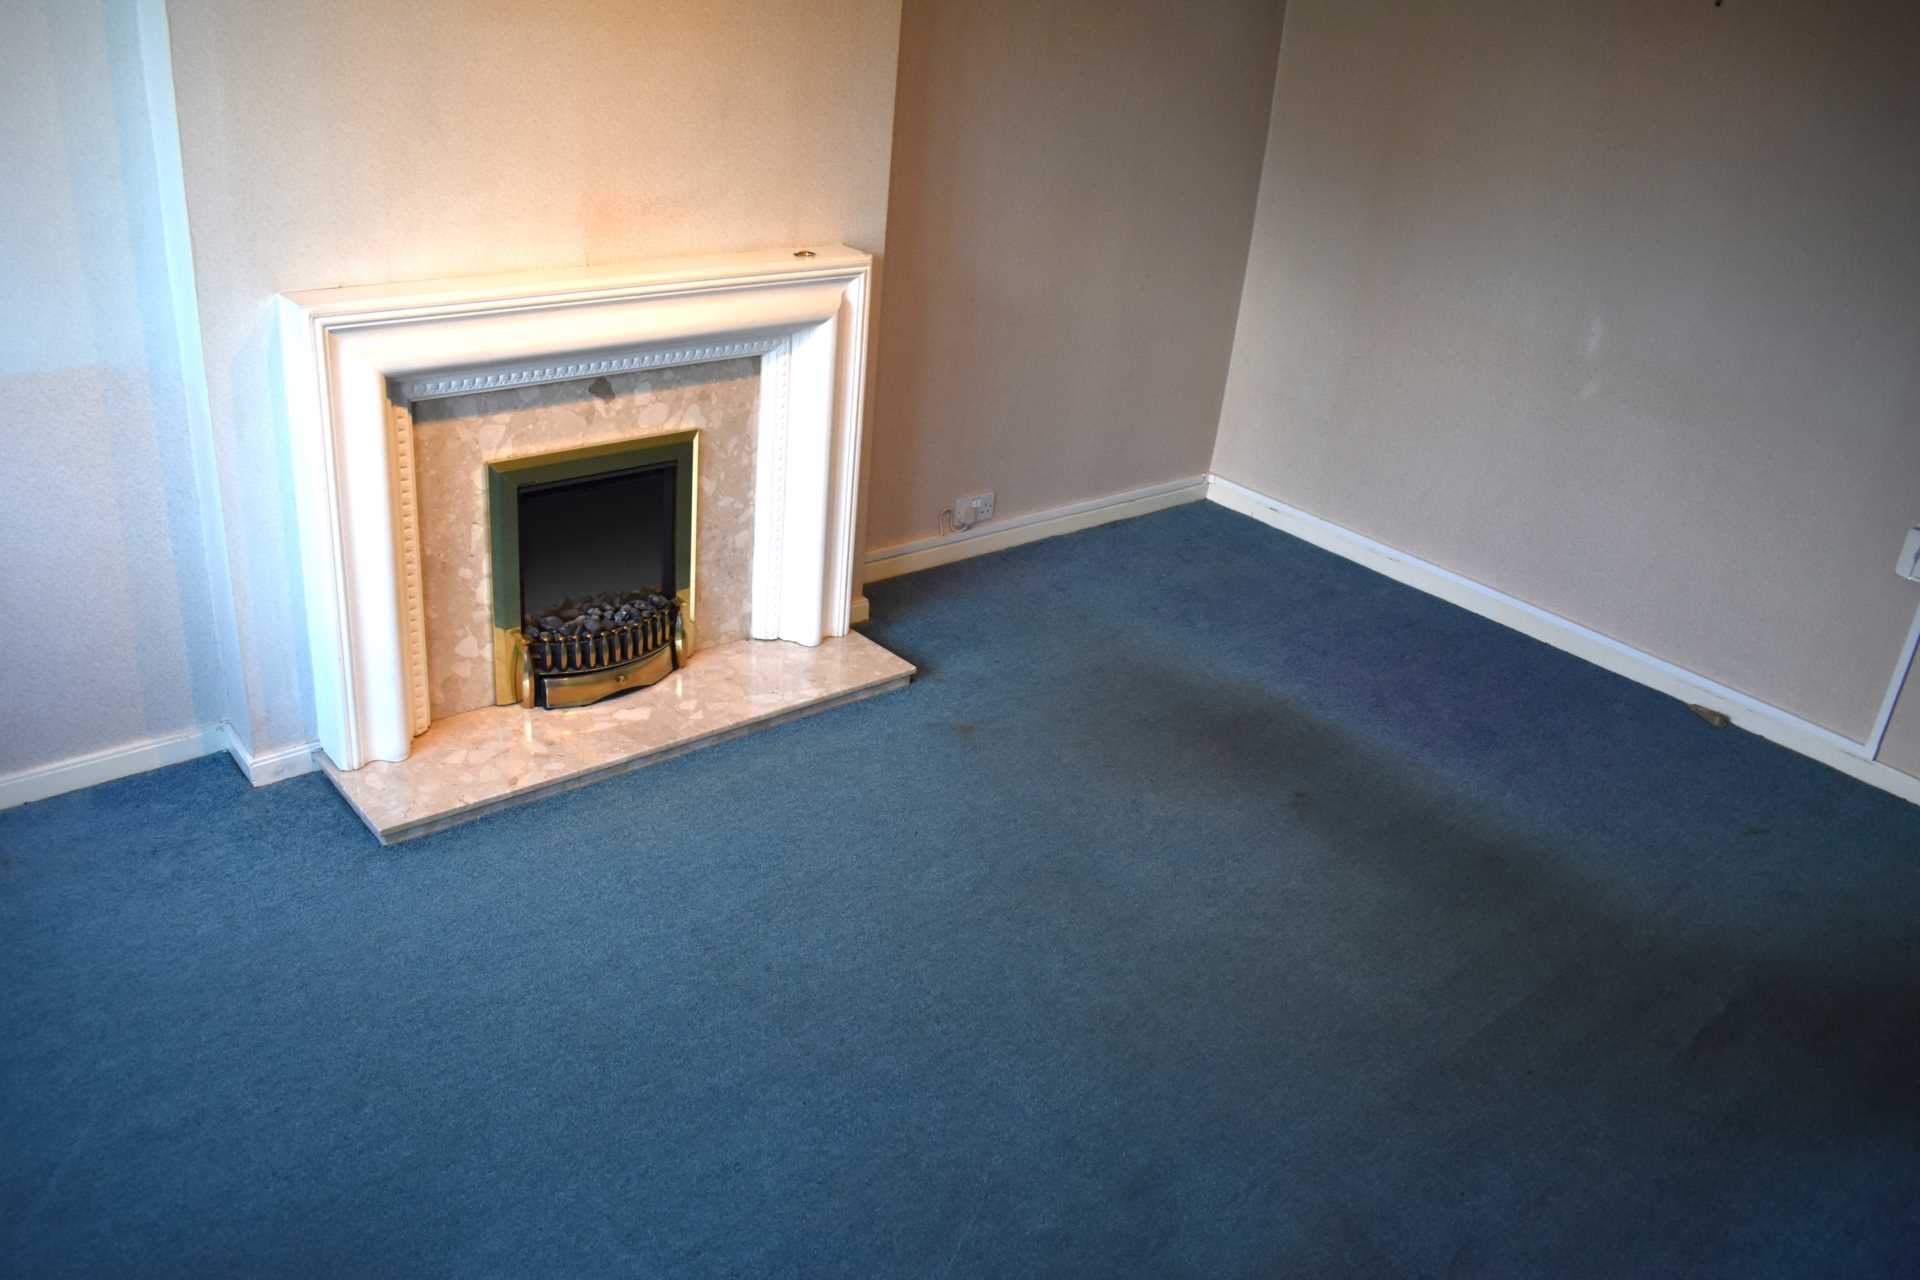 (2 or 3 Bedrooms) - Lea Gate Close, Harwood, Image 3